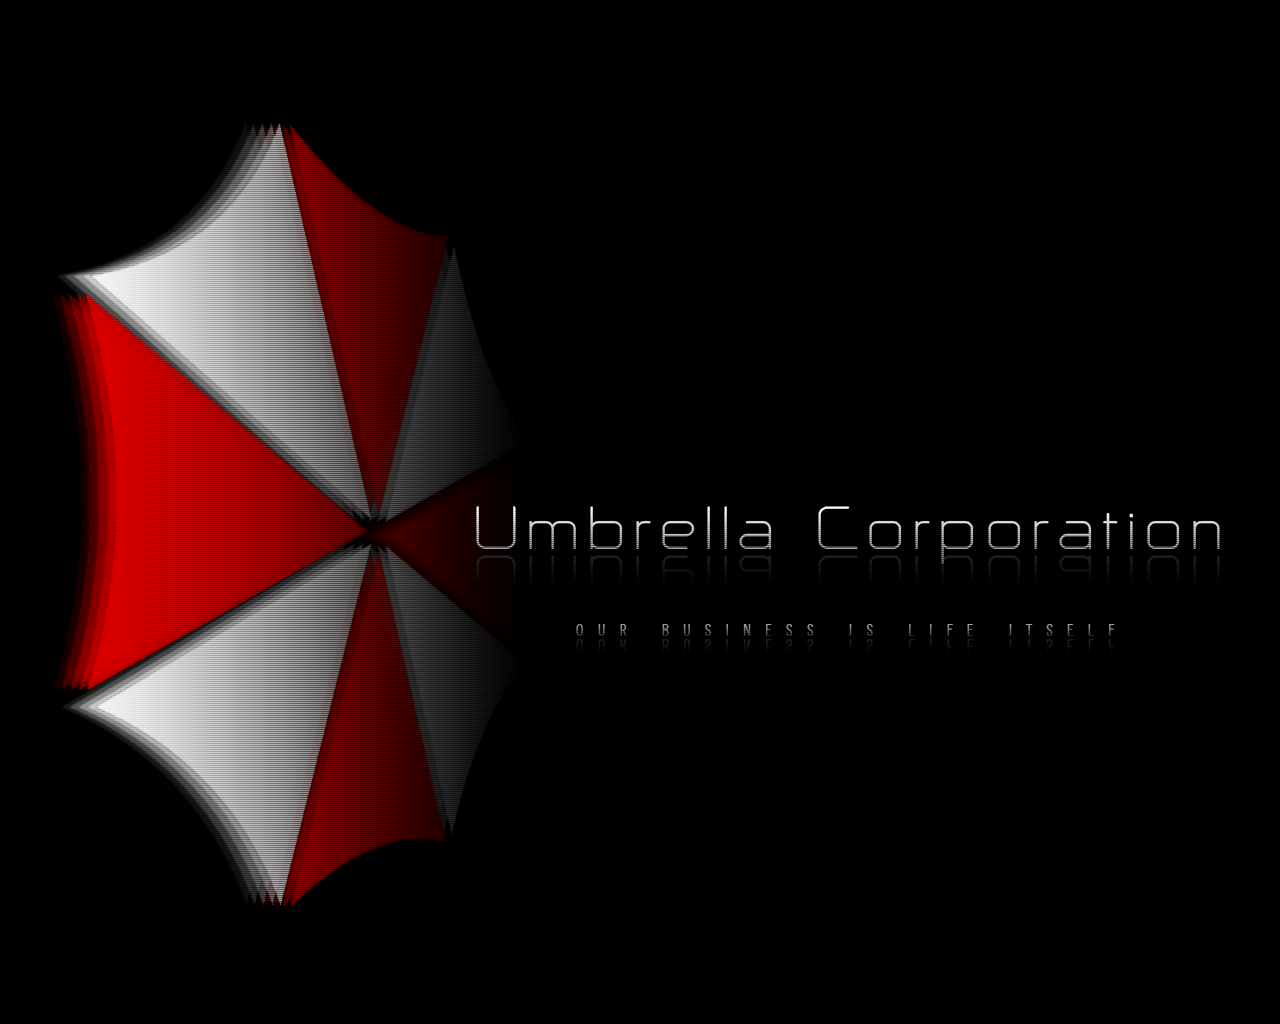 Umbrella Corp Wallpaper 01 by Disease of Machinery on